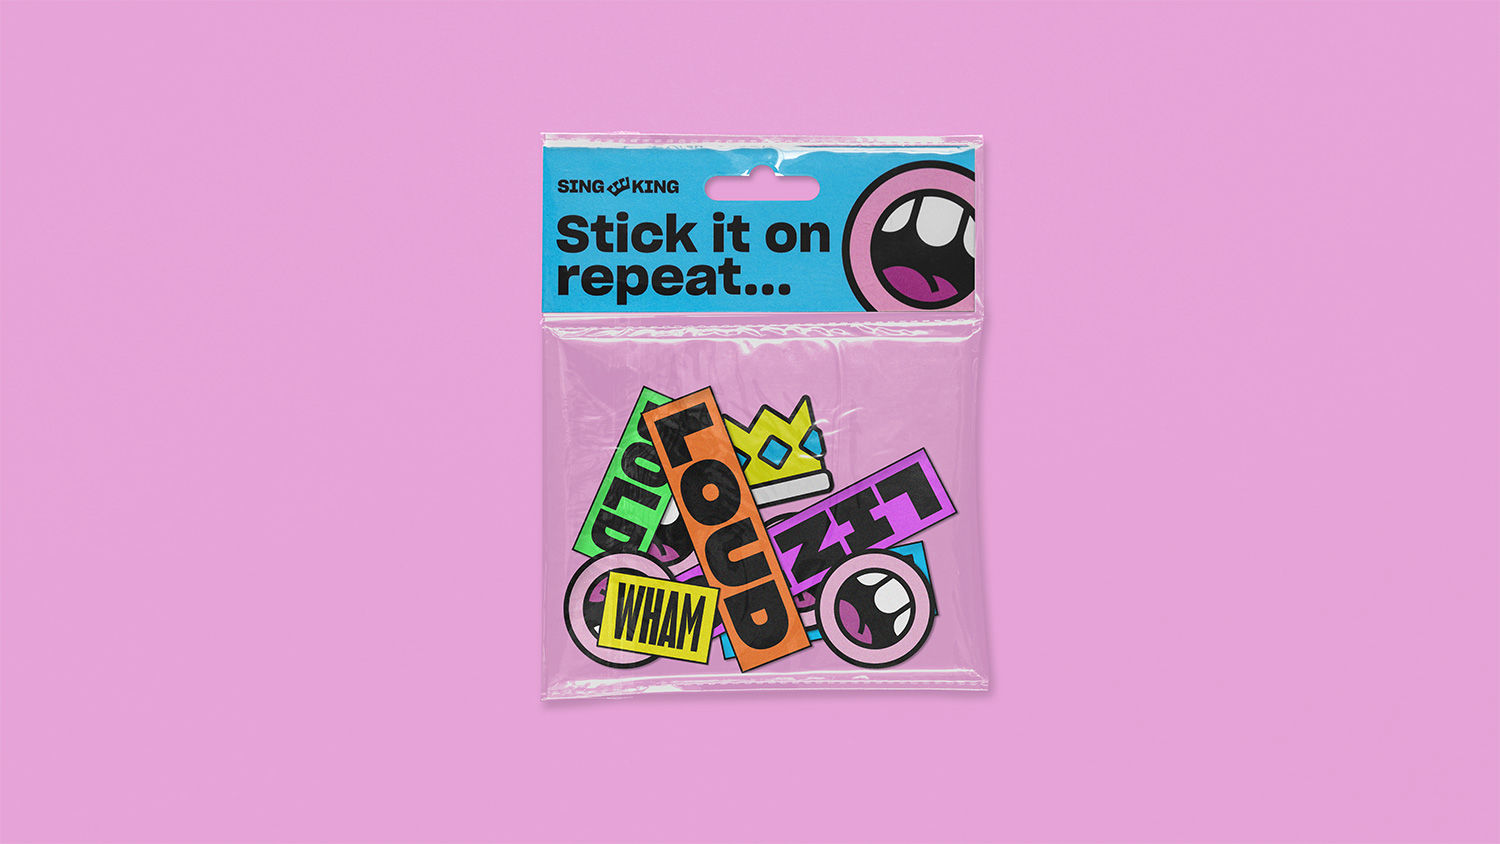 Visual identity and stickers for karaoke brand Sing King designed by London-based Nomad